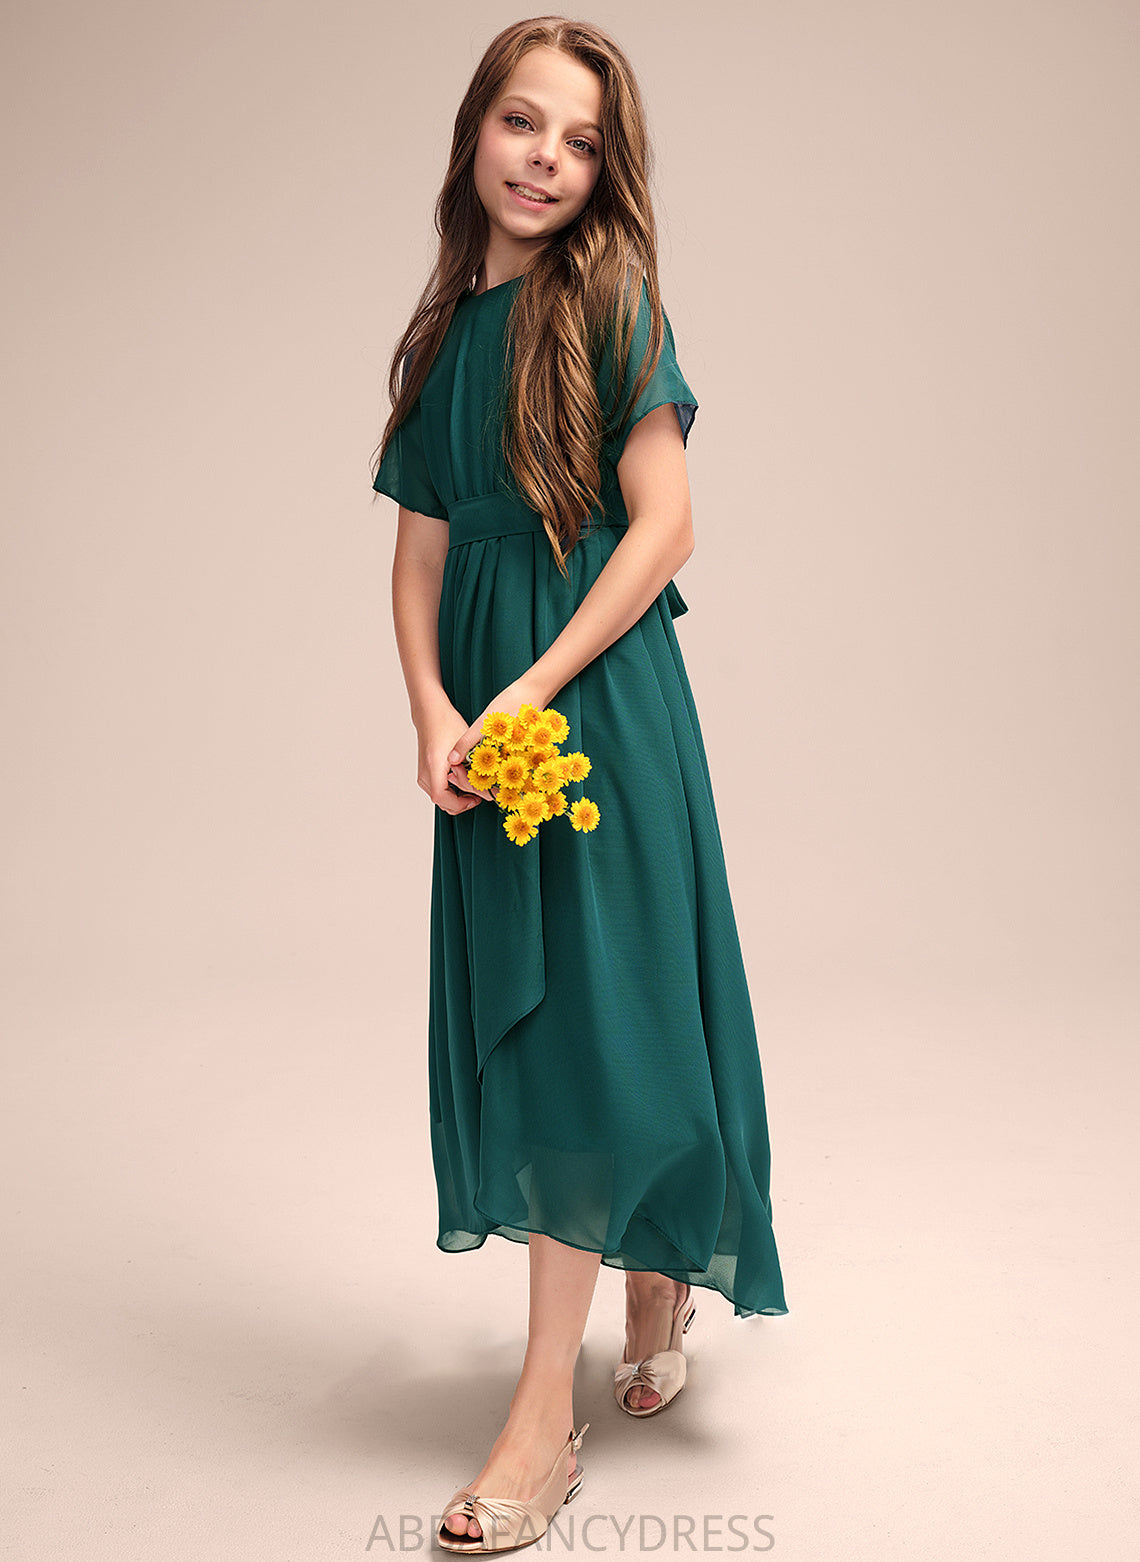 Bow(s) Ruffle Chiffon A-Line With Asymmetrical Junior Bridesmaid Dresses Neck Scoop Angie